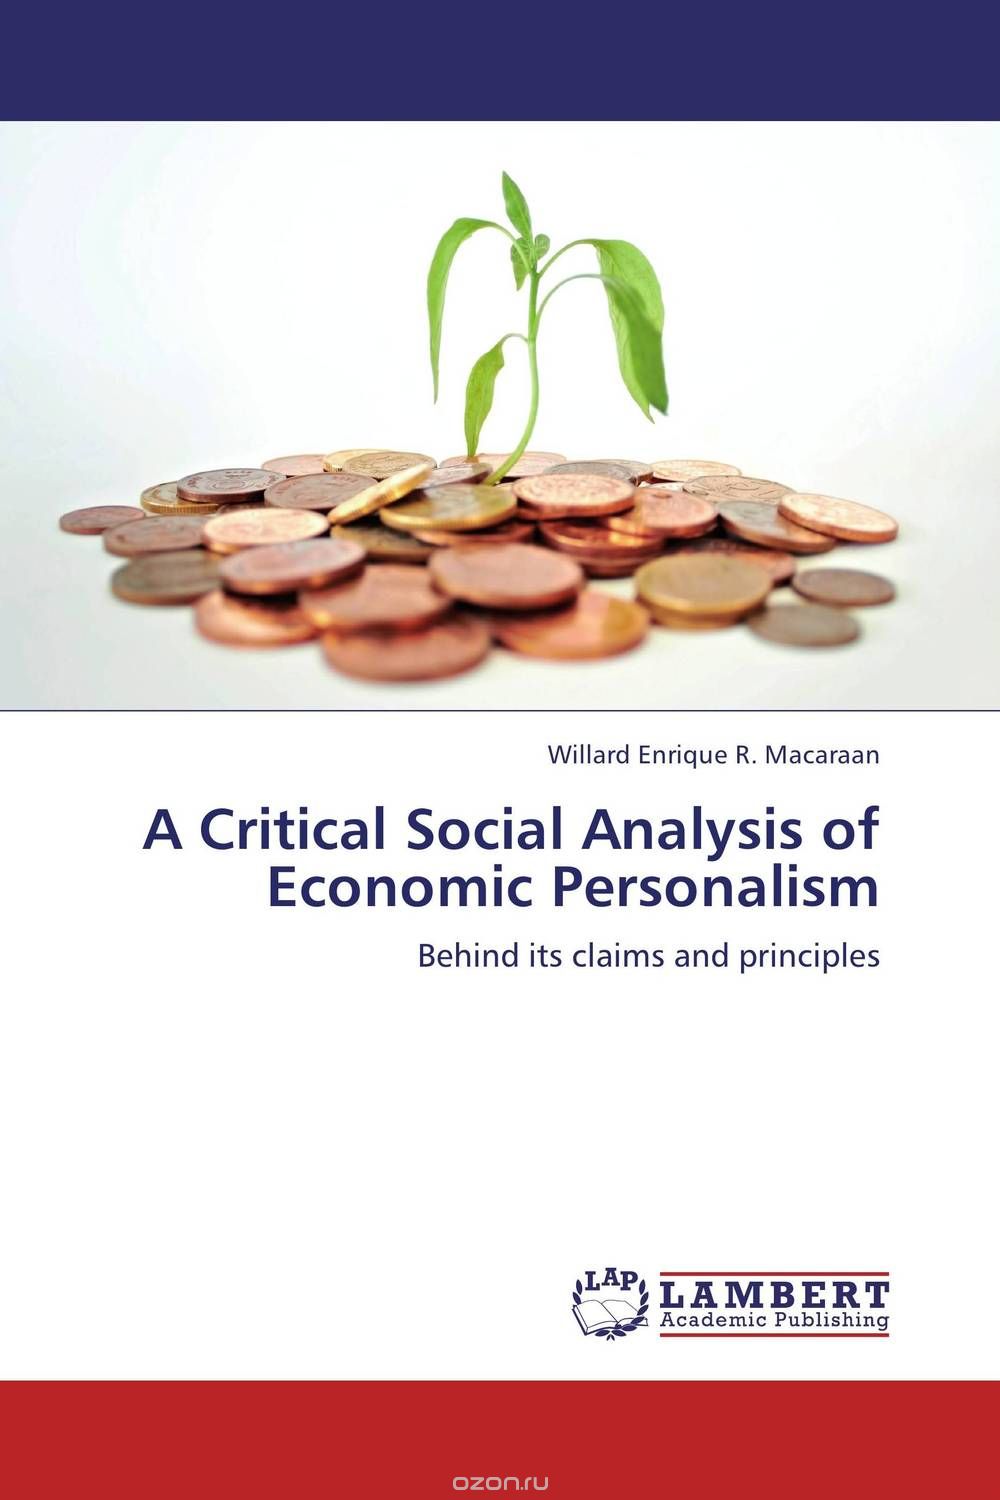 A Critical Social Analysis of Economic Personalism